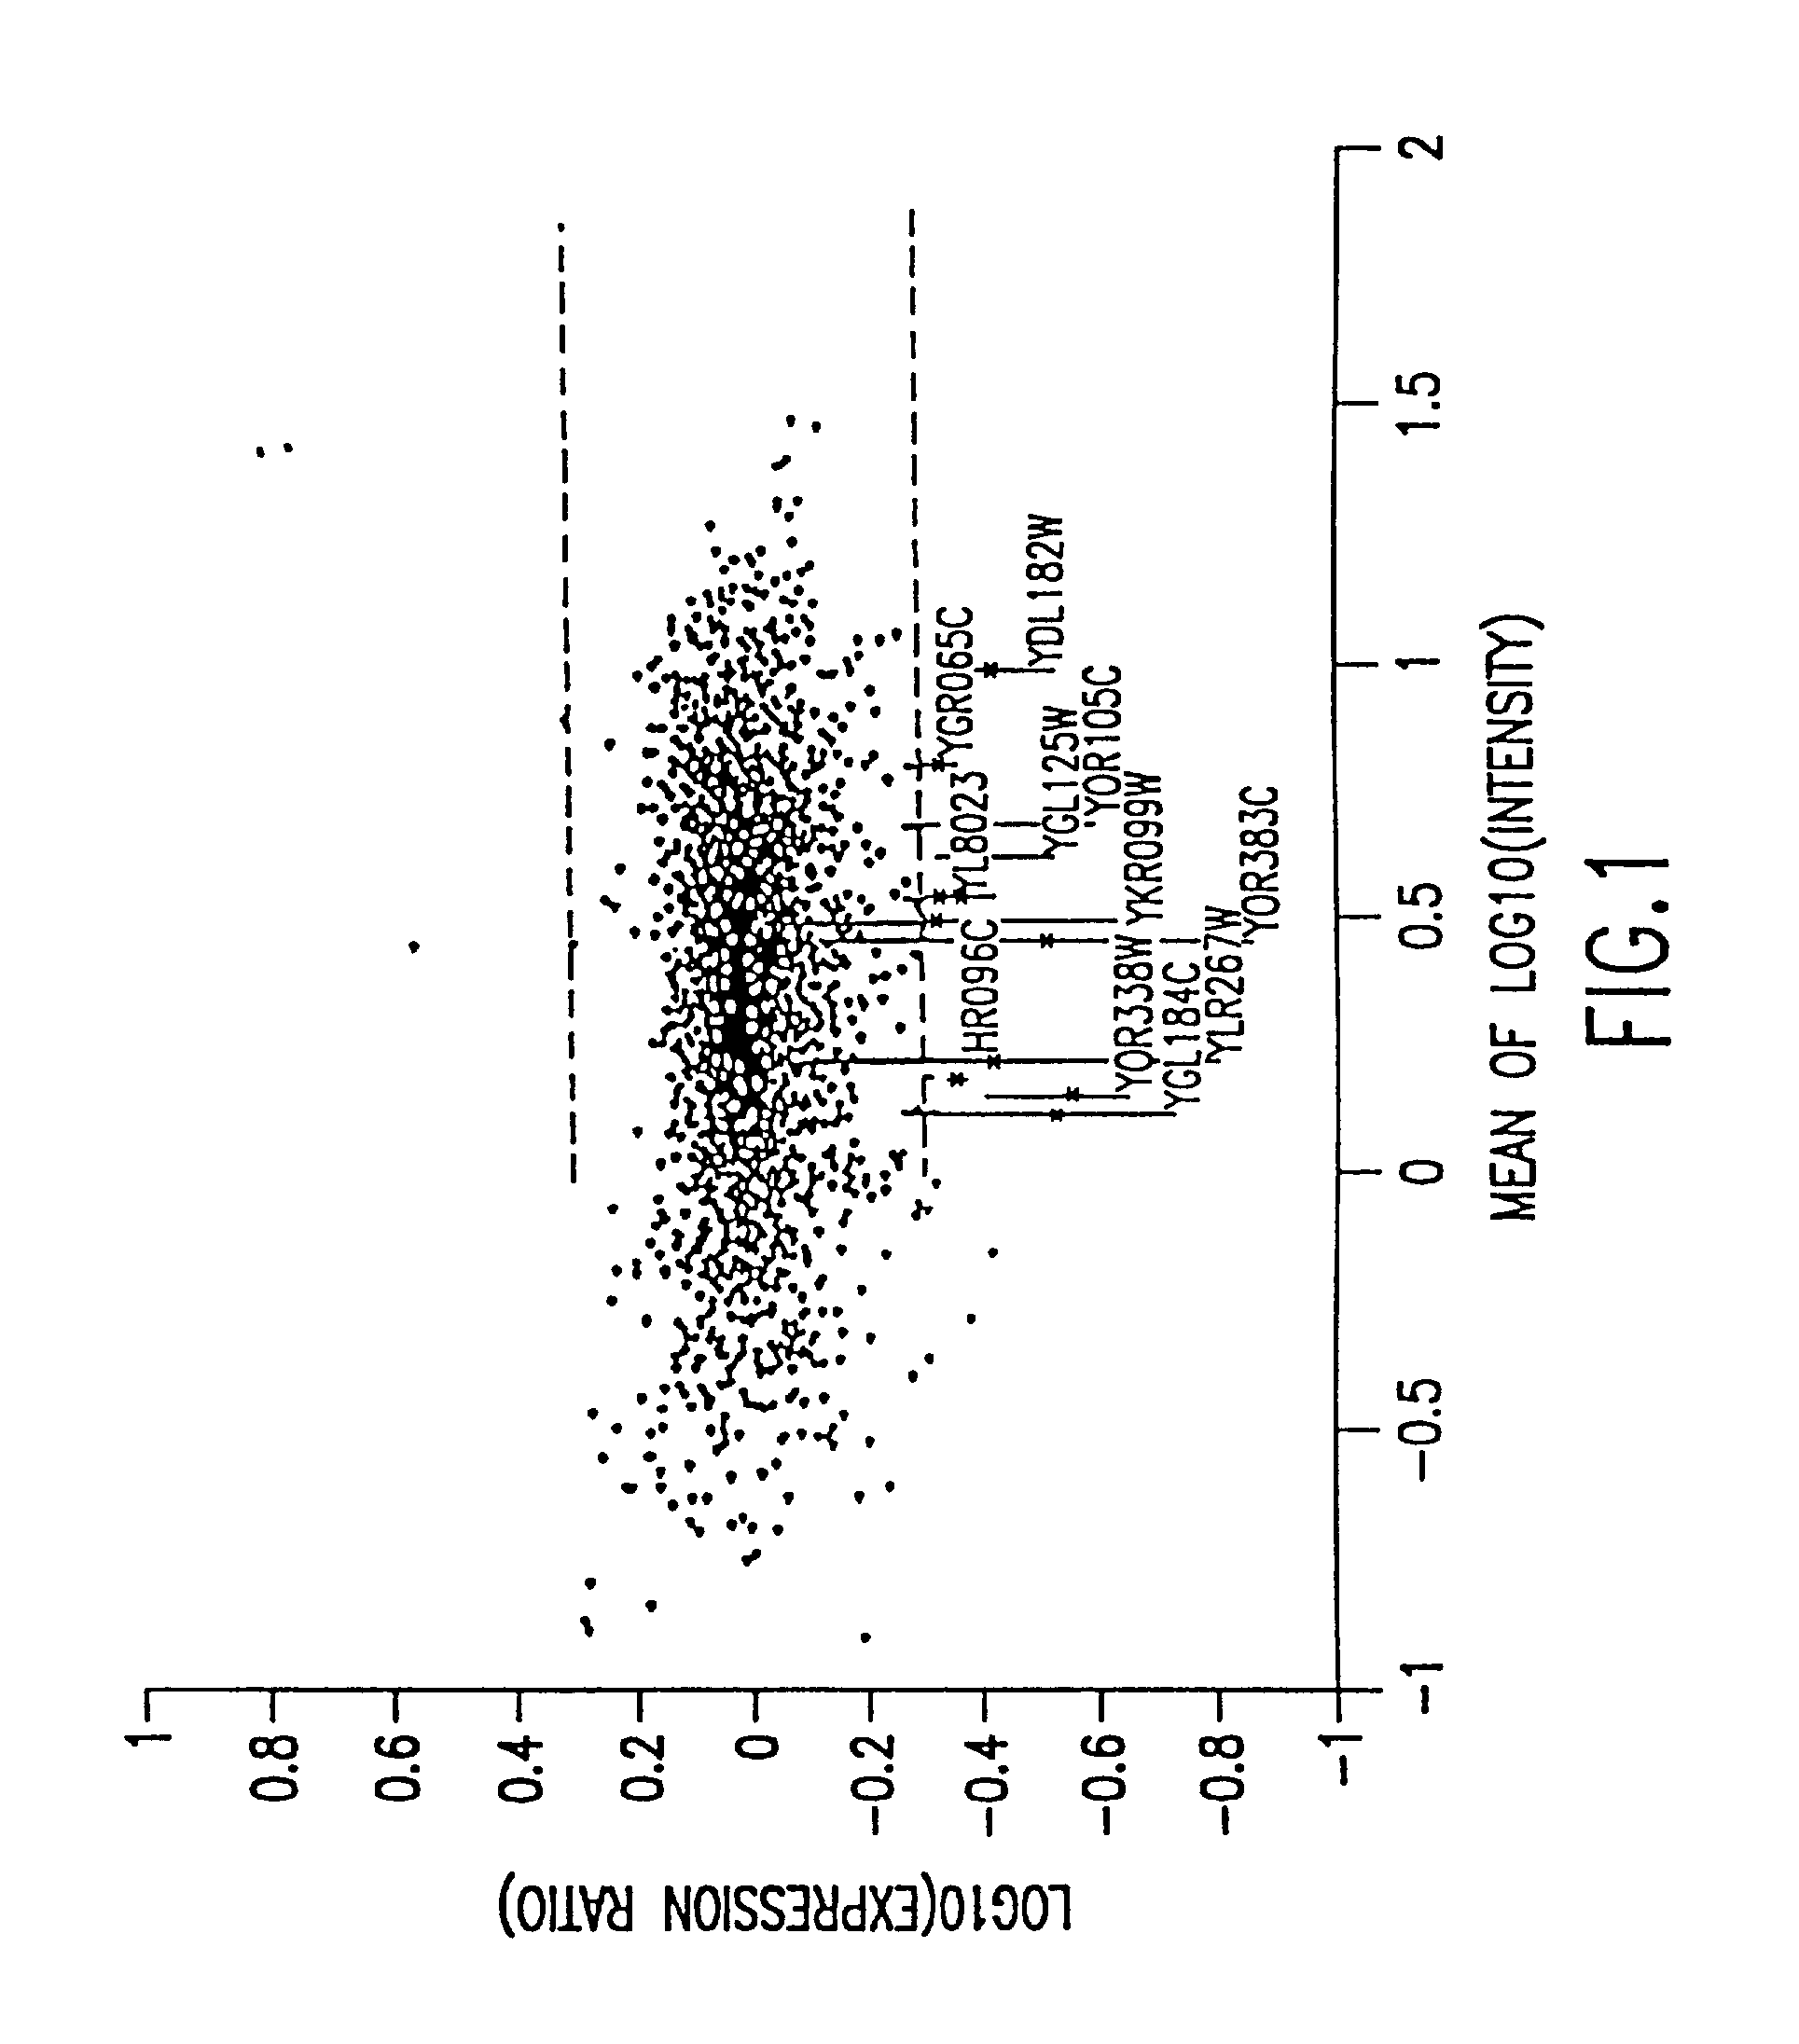 Methods of monitoring disease states and therapies using gene expression profiles